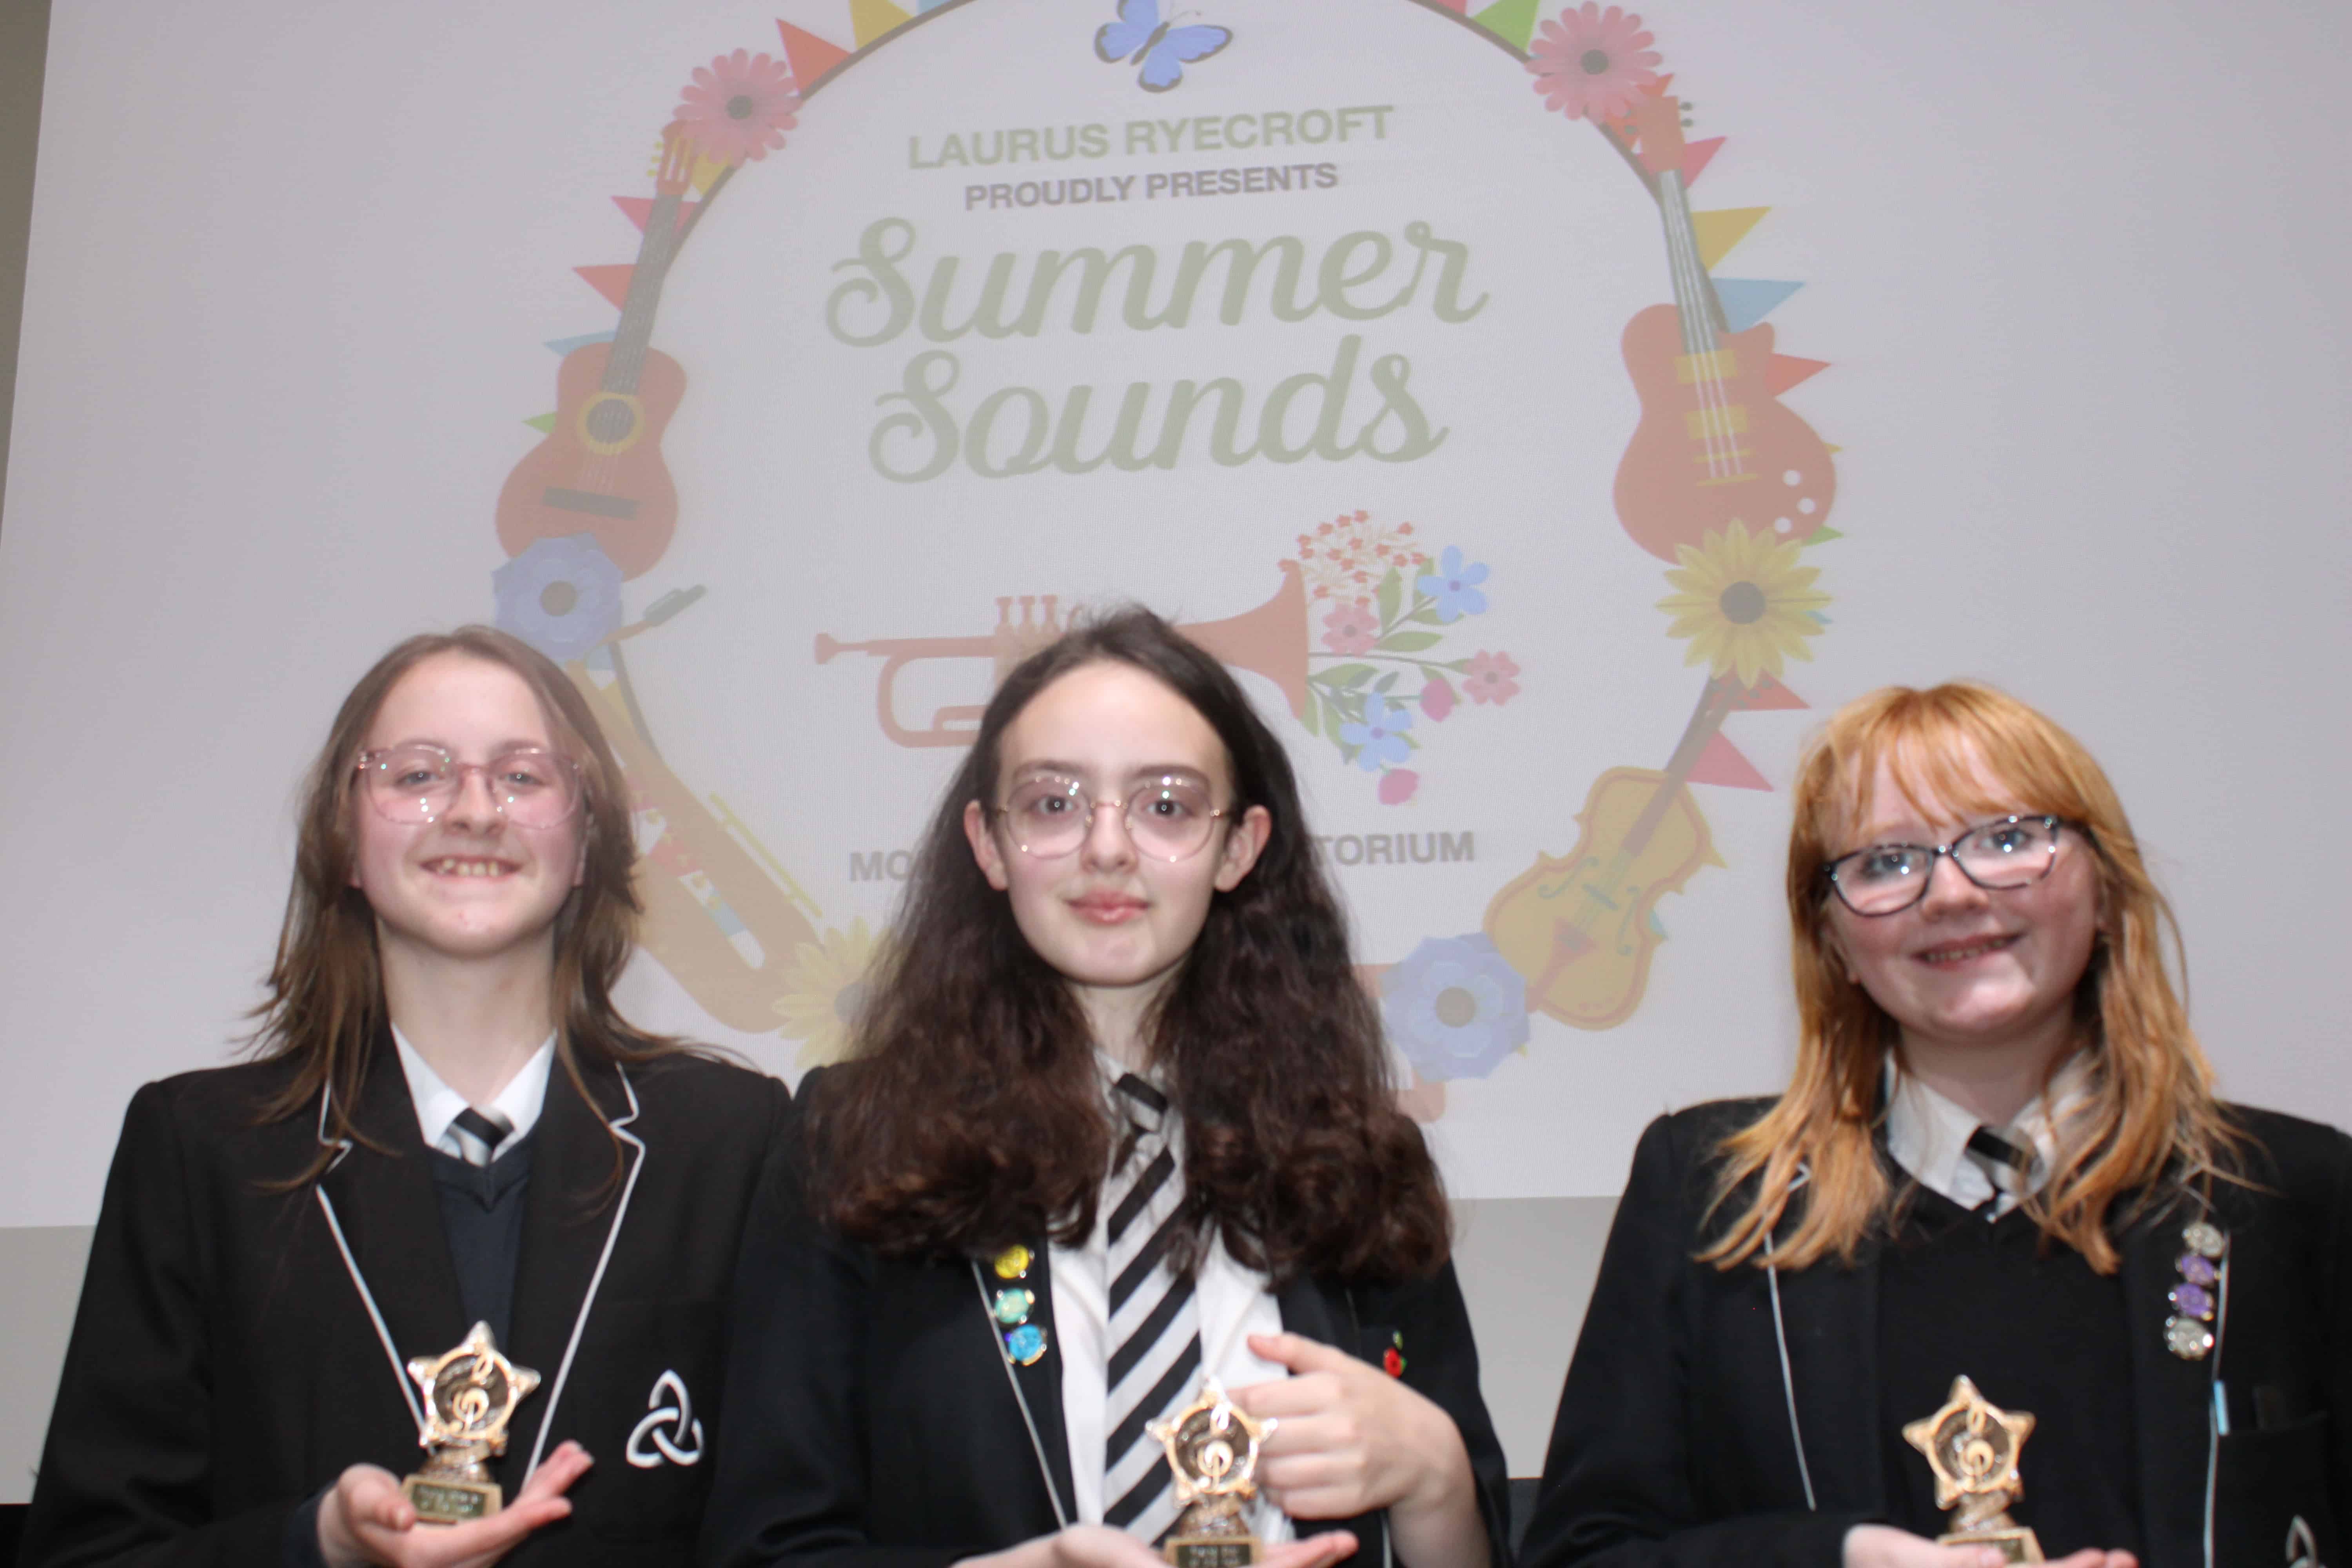 The 3 winning students stand smiling and holding their trophies in front of the Laurus Ryecroft Summer Sounds decorative screen.